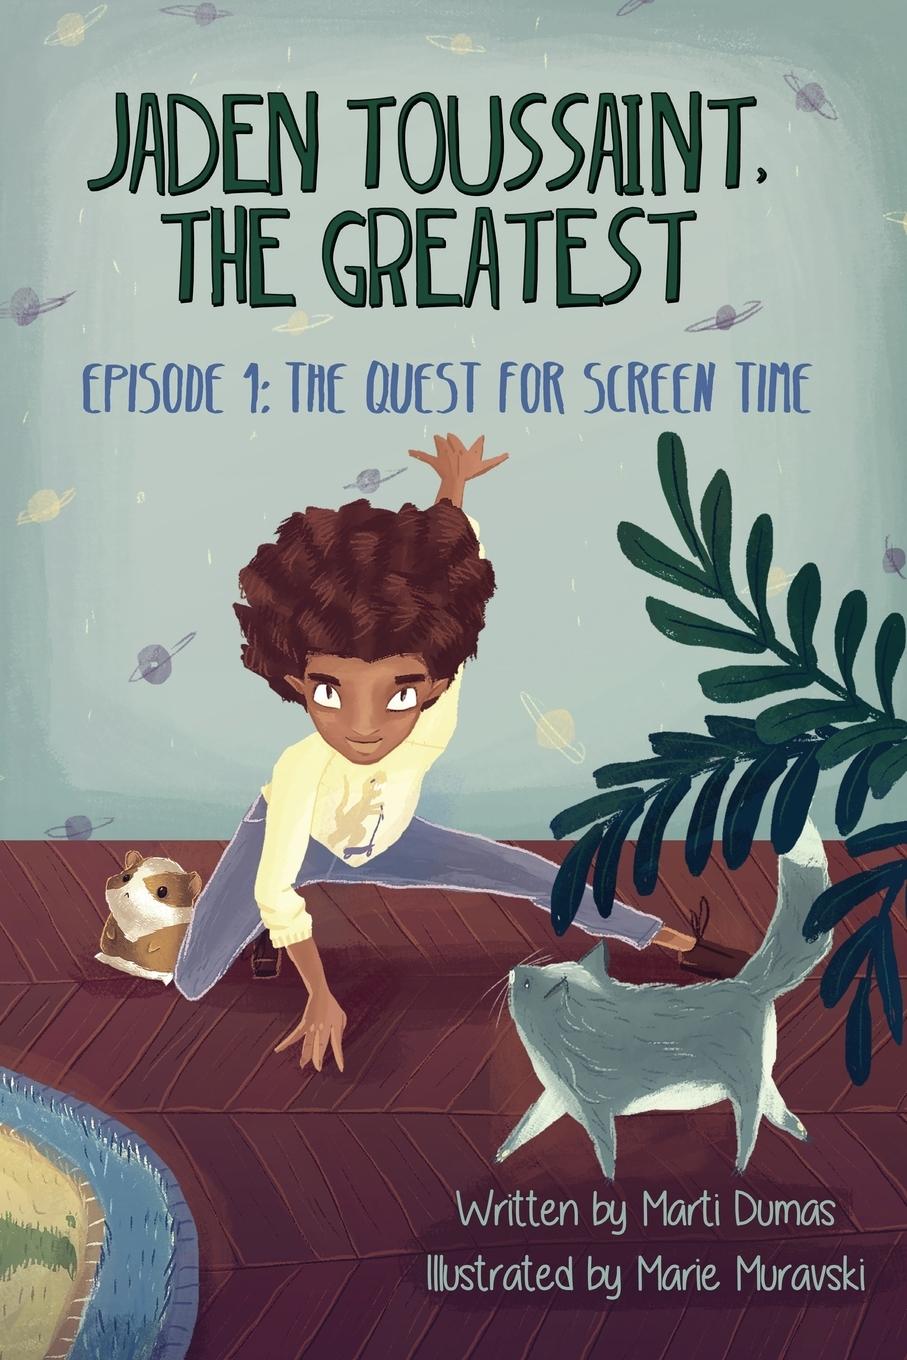 The Quest for Screen Time